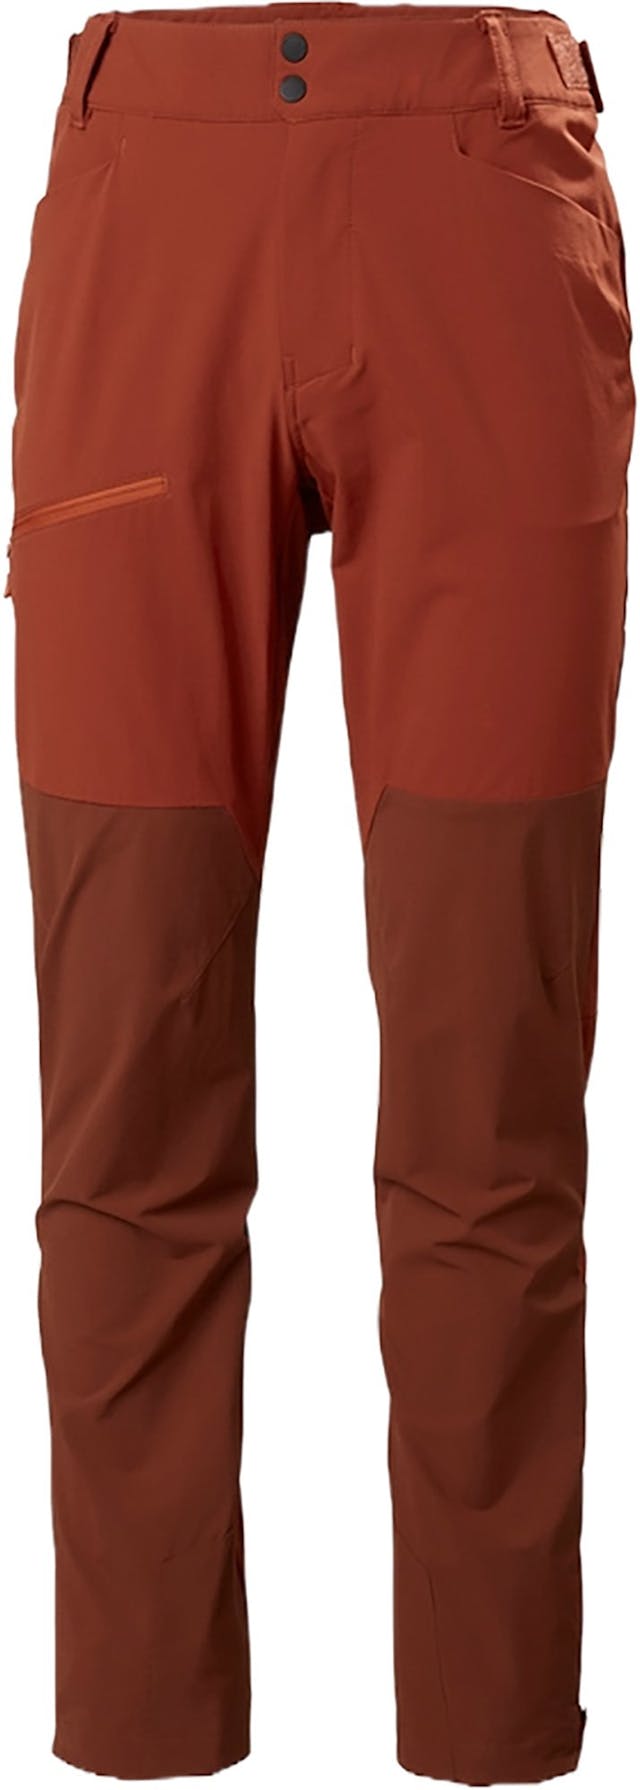 Product image for Blaze Softshell Pant - Men's